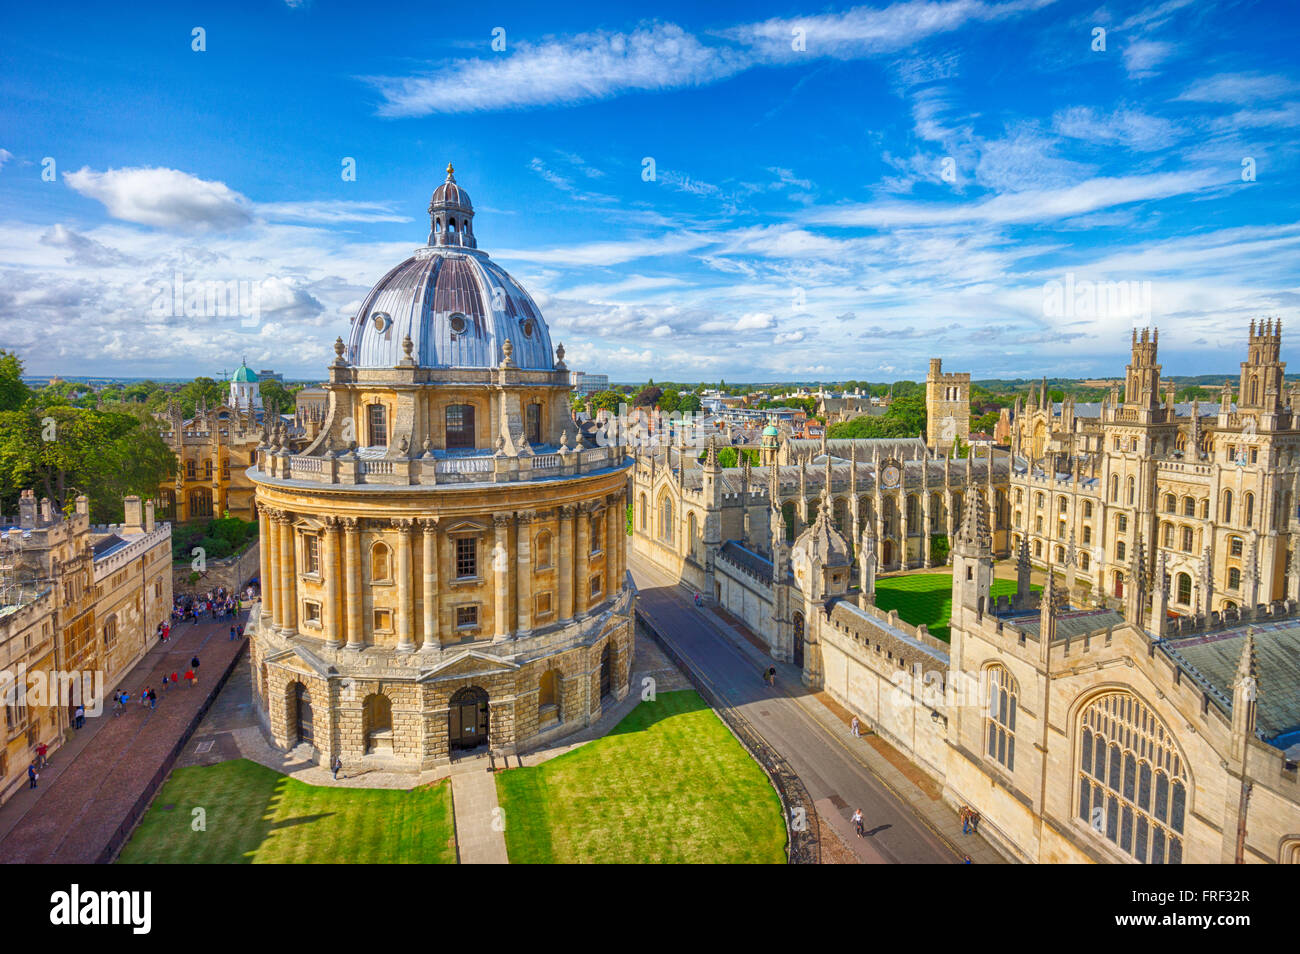 The Bodleian Library, Radcliffe Camera building completed in 1747, viewed from the University church tower. Stock Photo